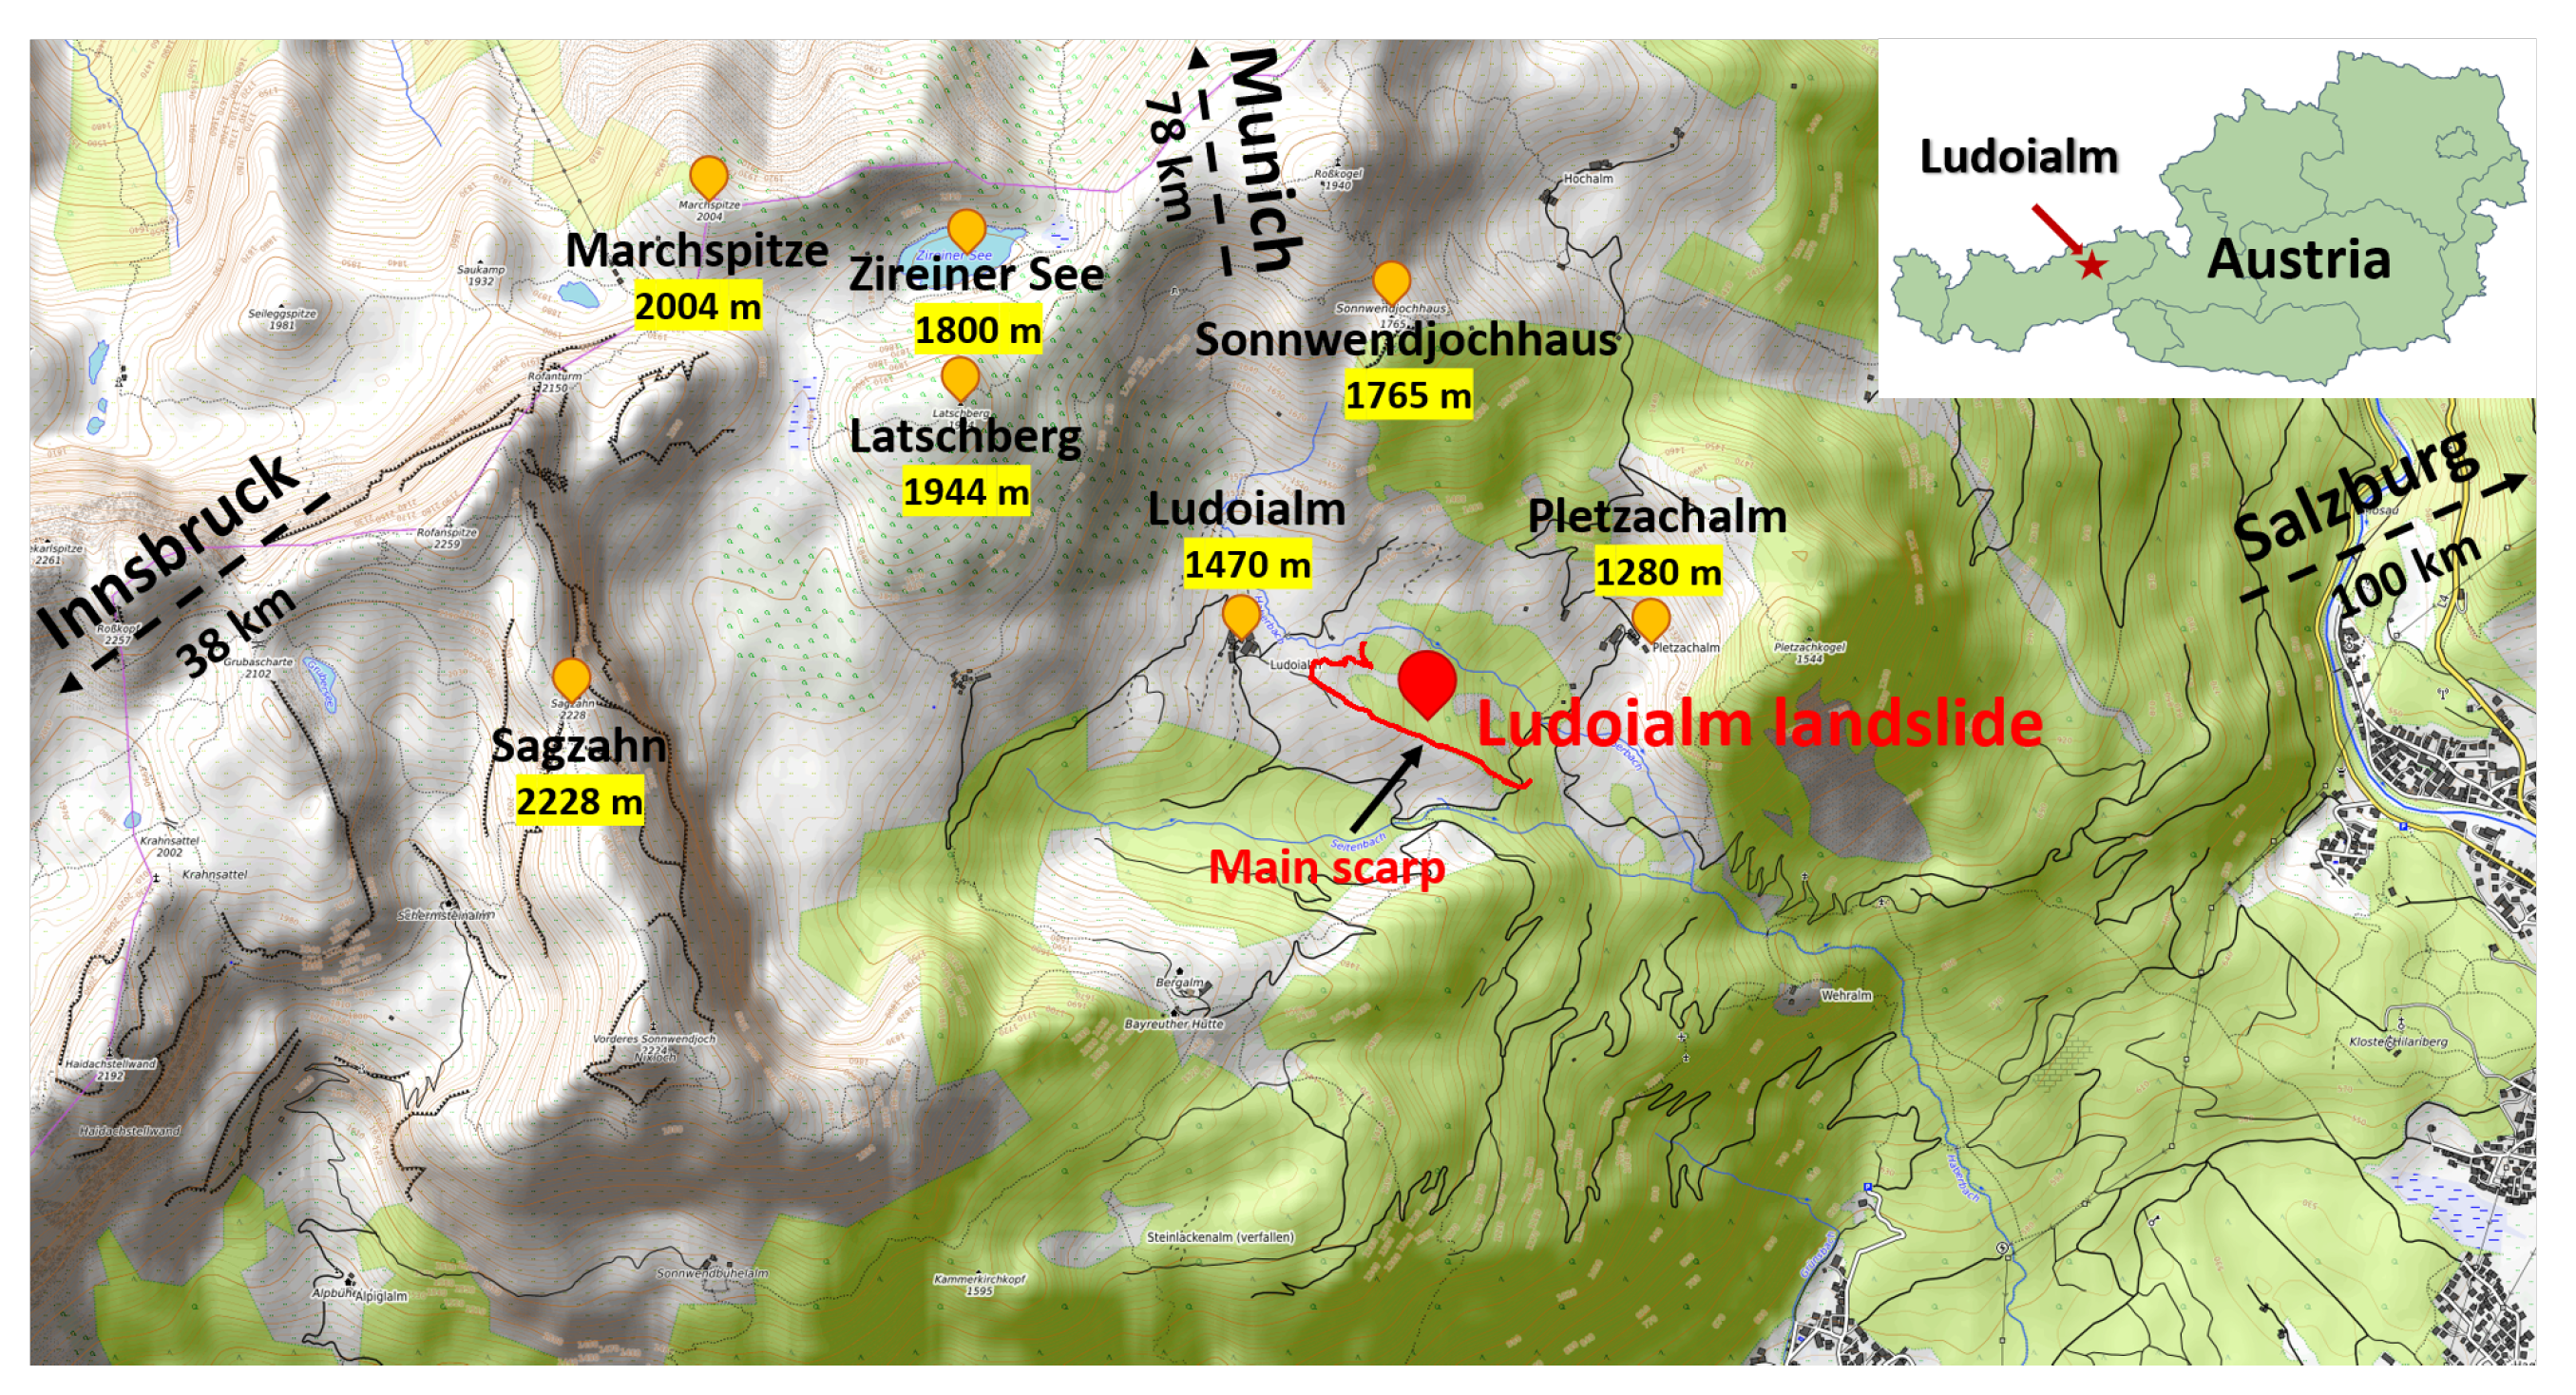 Applied Sciences | Free Full-Text | Mechanisms for the Formation of an  Exceptionally Gently Inclined Basal Shear Zone of a Landslide in Glacial  Sediments&mdash;The Ludoialm Case Study